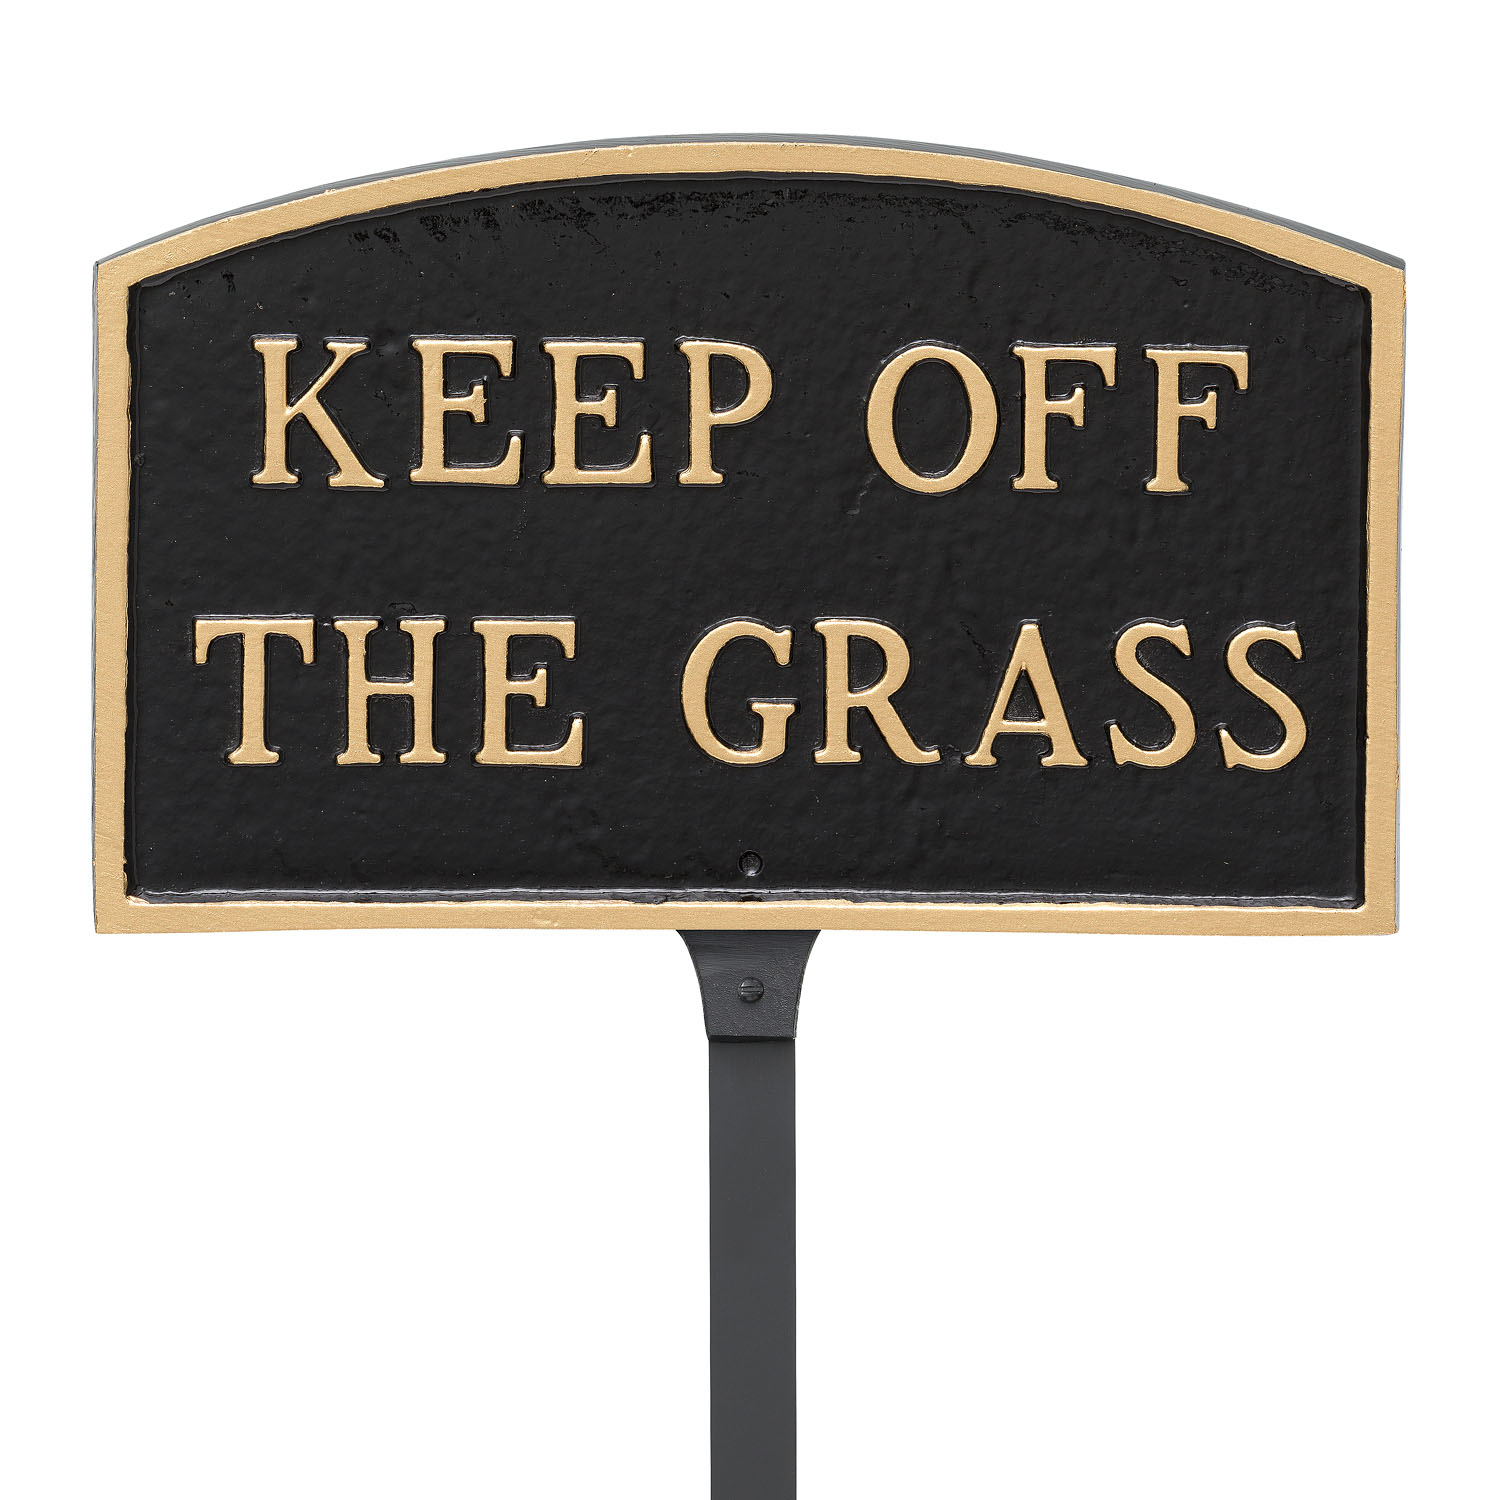 Please Keep Off The Grass Thank You Sign 12" x 18" Heavy Gauge Aluminum Signs